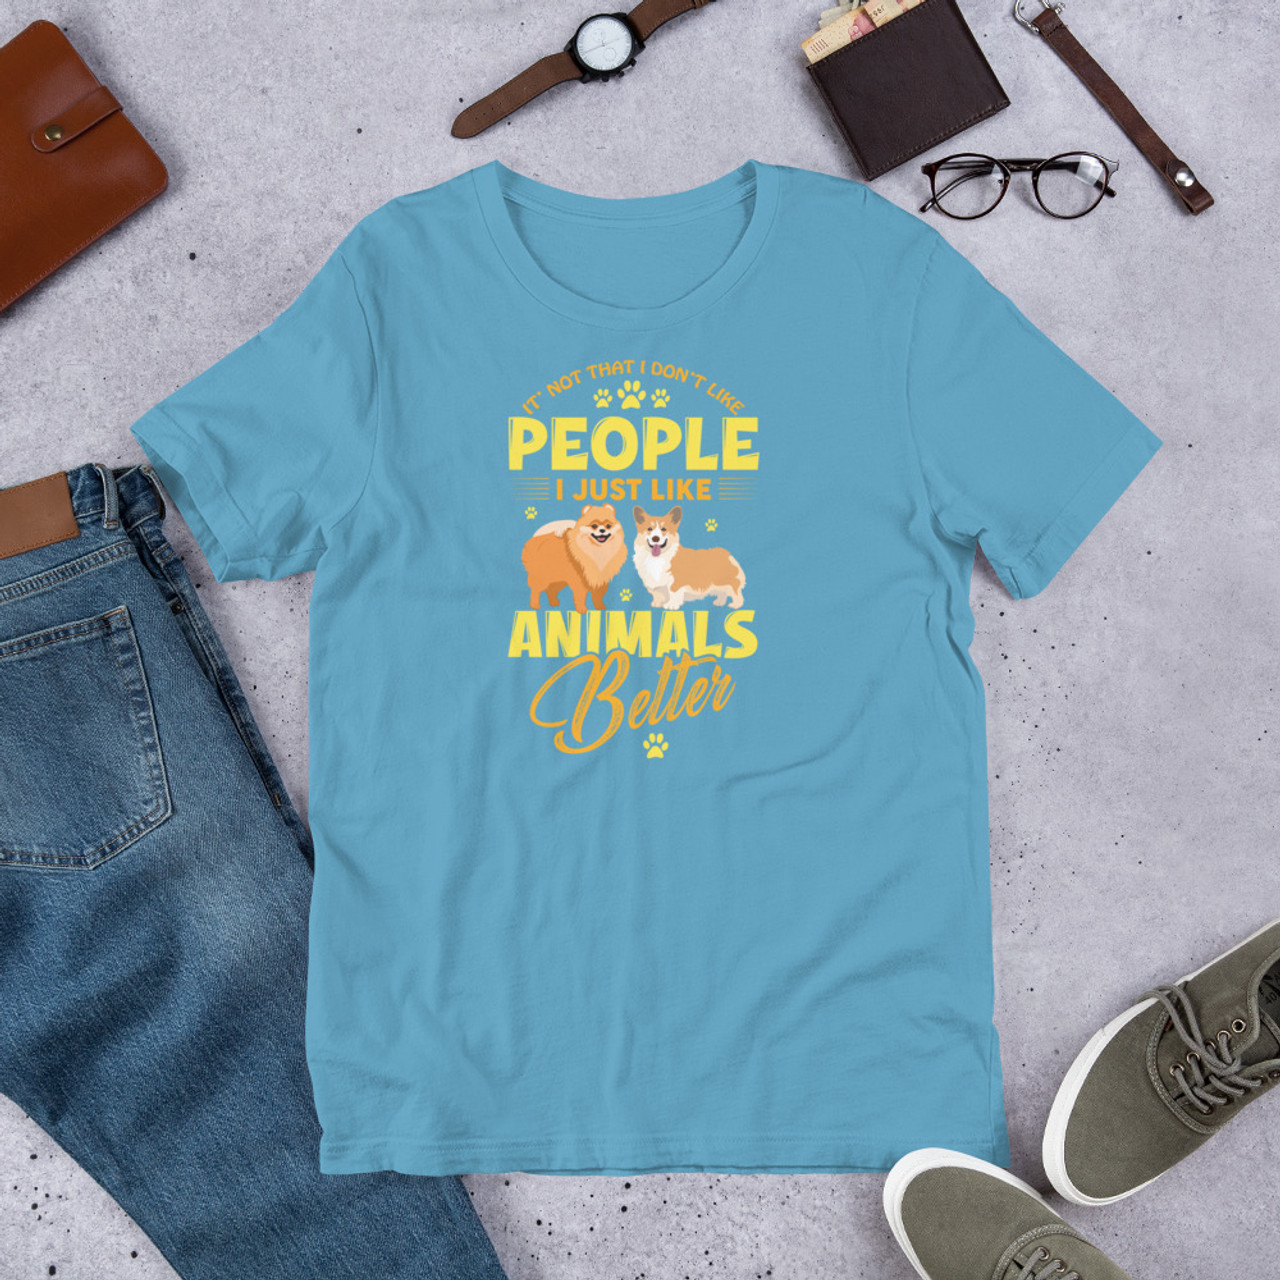 Ocean Blue T-Shirt - Bella + Canvas 3001 It's Not That I Don't Like People